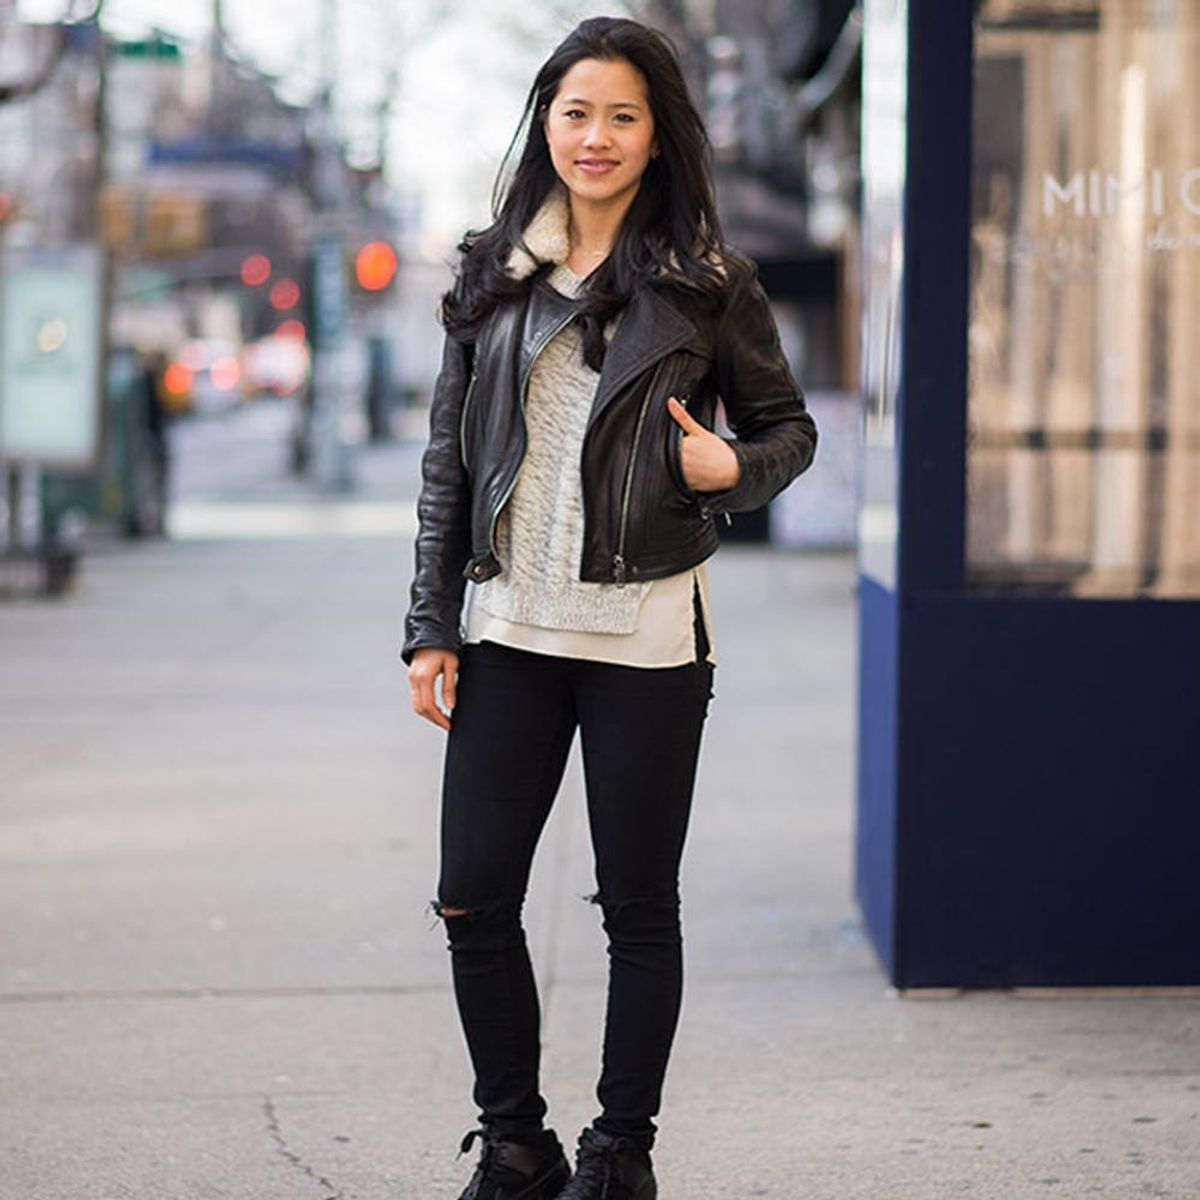 See How This Foodie #Girlboss Rocks a Leather Jacket to Work